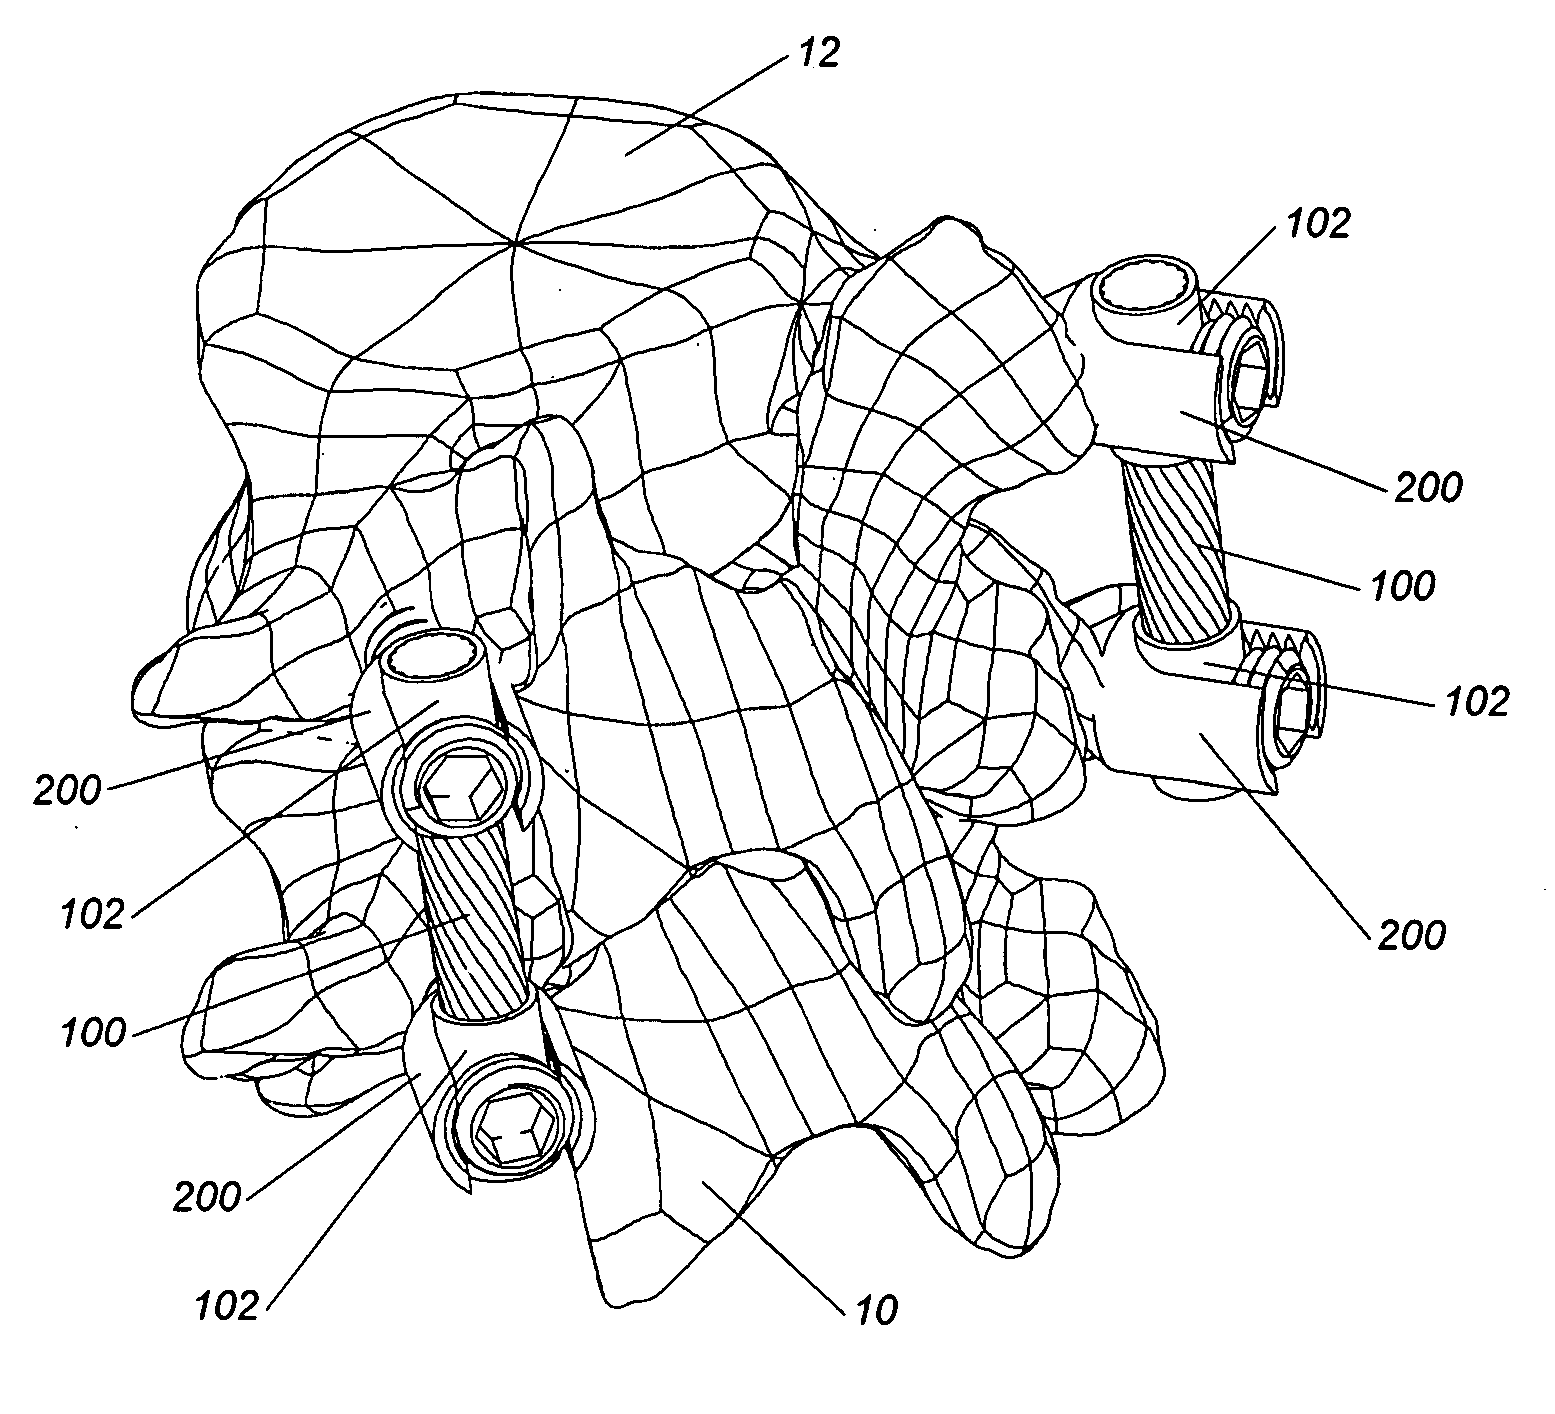 Dynamic spinal stabilization system incorporating a wire rope